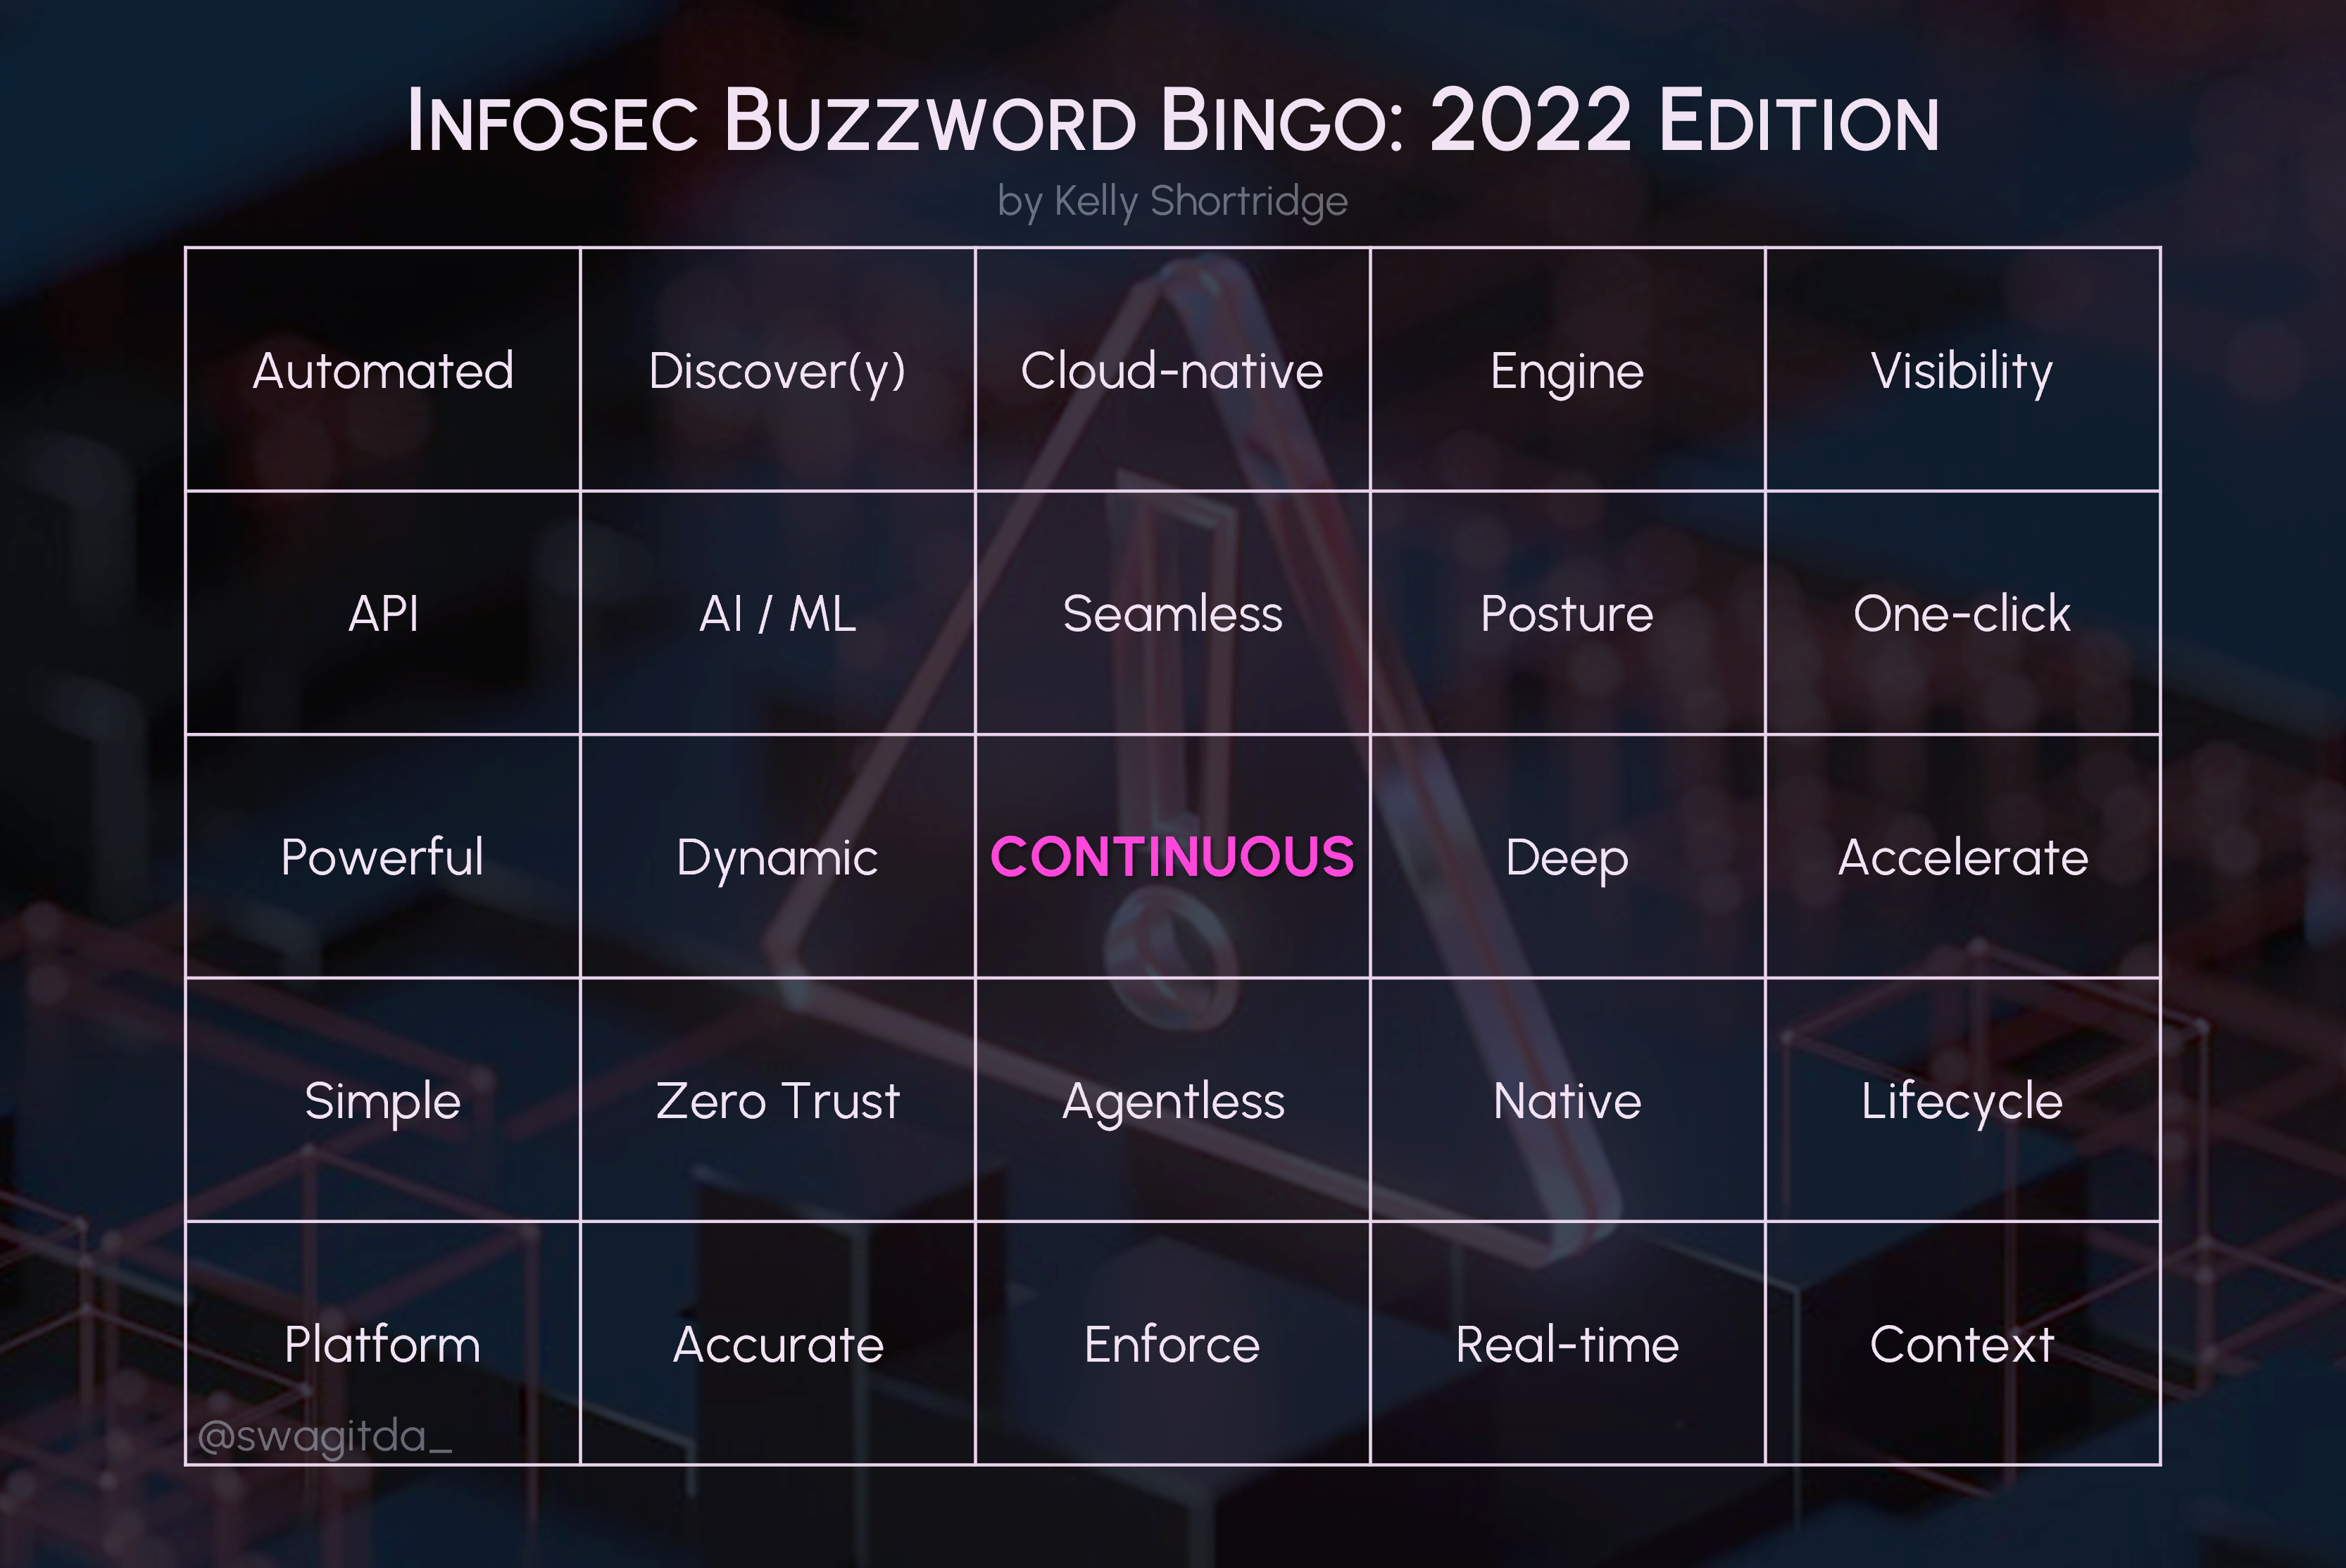 The 2022 edition of the infosec buzzword bingo card. The background is terrible cyber art that is roughly a translucent caution sign resting above vaporwave colored cubes that are meant to look vaguely like a circuit board. In order from left to right, starting on the upper left side, the buzzwords included on the card are as follows. Automated. Discover. Cloud-native. Engine. Visibility. API. AI / ML. Seamless. Posture. One-click. Powerful. Dynamic. Continuous, which is the center word of the bingo card. Deep. Accelerate. Simple. Zero Trust. Agentless. Native. Lifecycle. Platform. Accurate. Enforce. Real-time. Context.